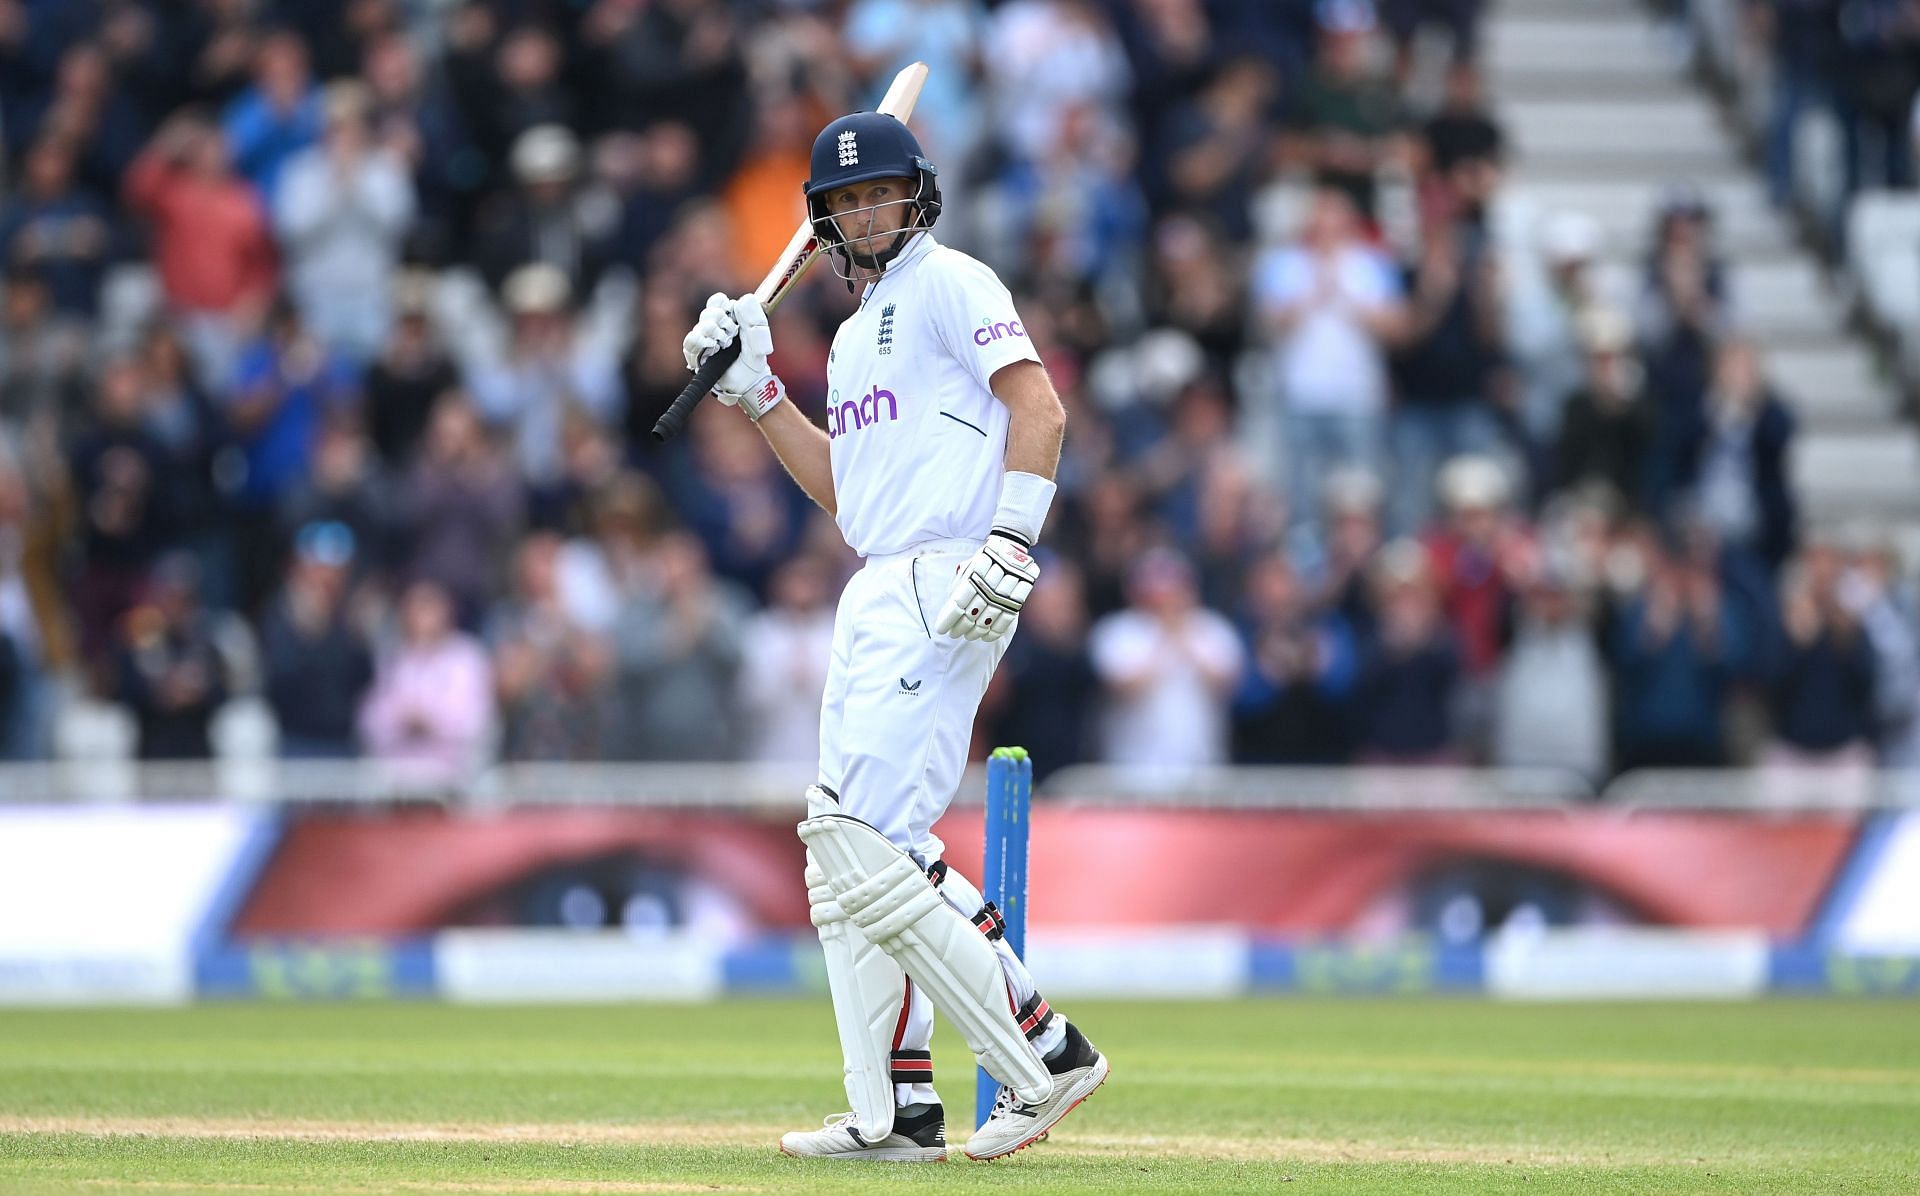 Joe Root is the No. 1 Test batter. Pic: Getty Images